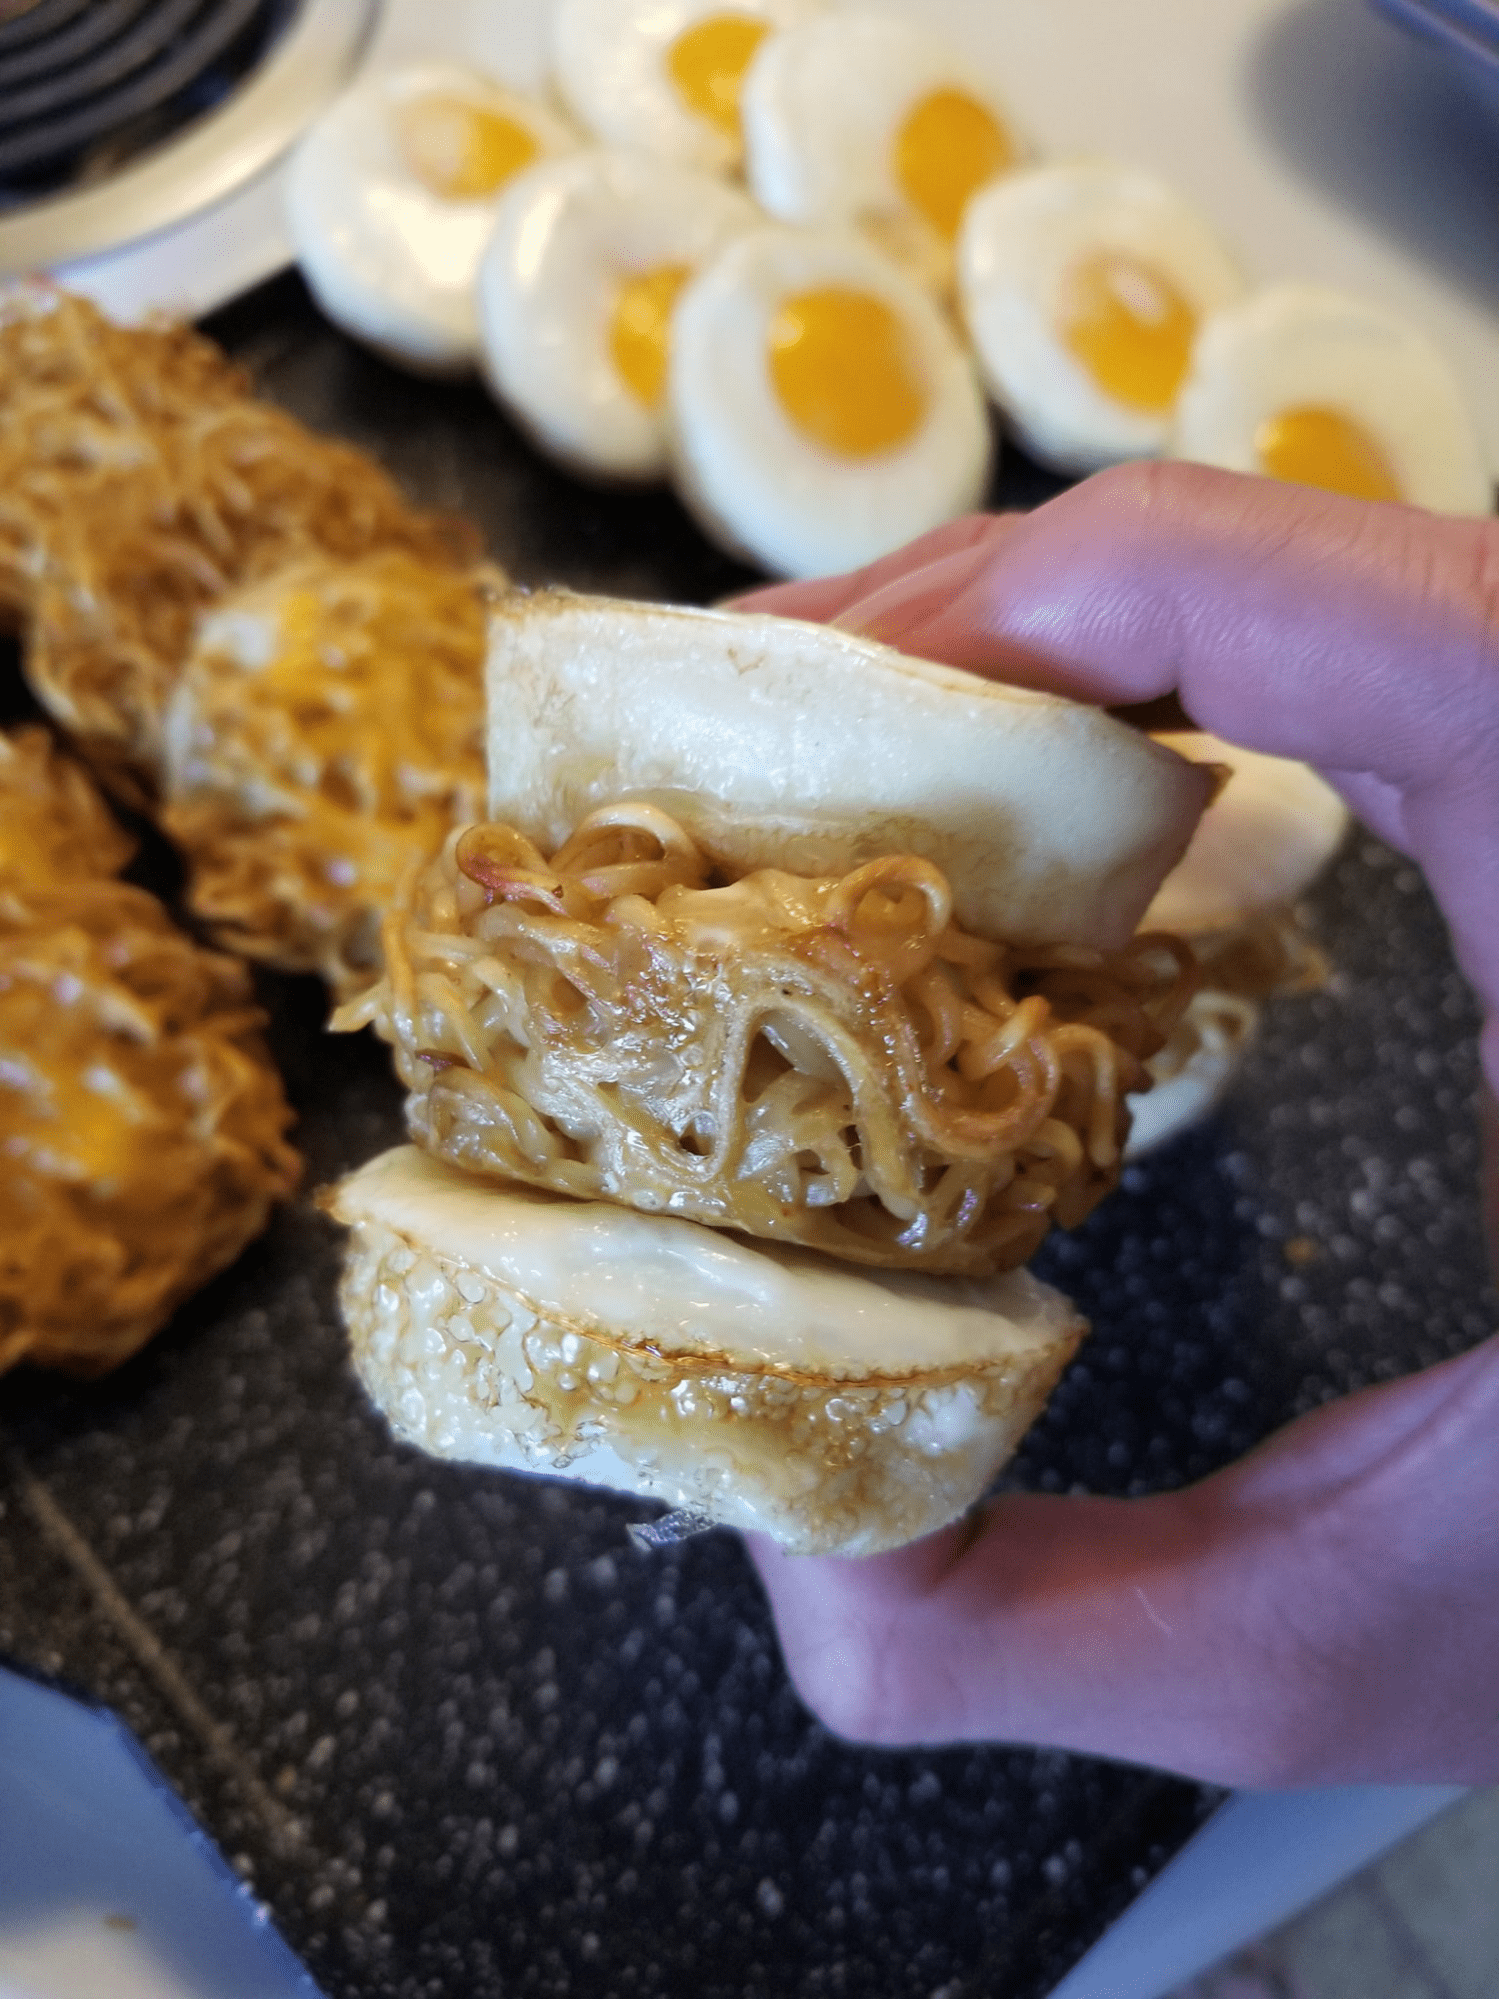 baked noodle cup sandwiched in two eggs